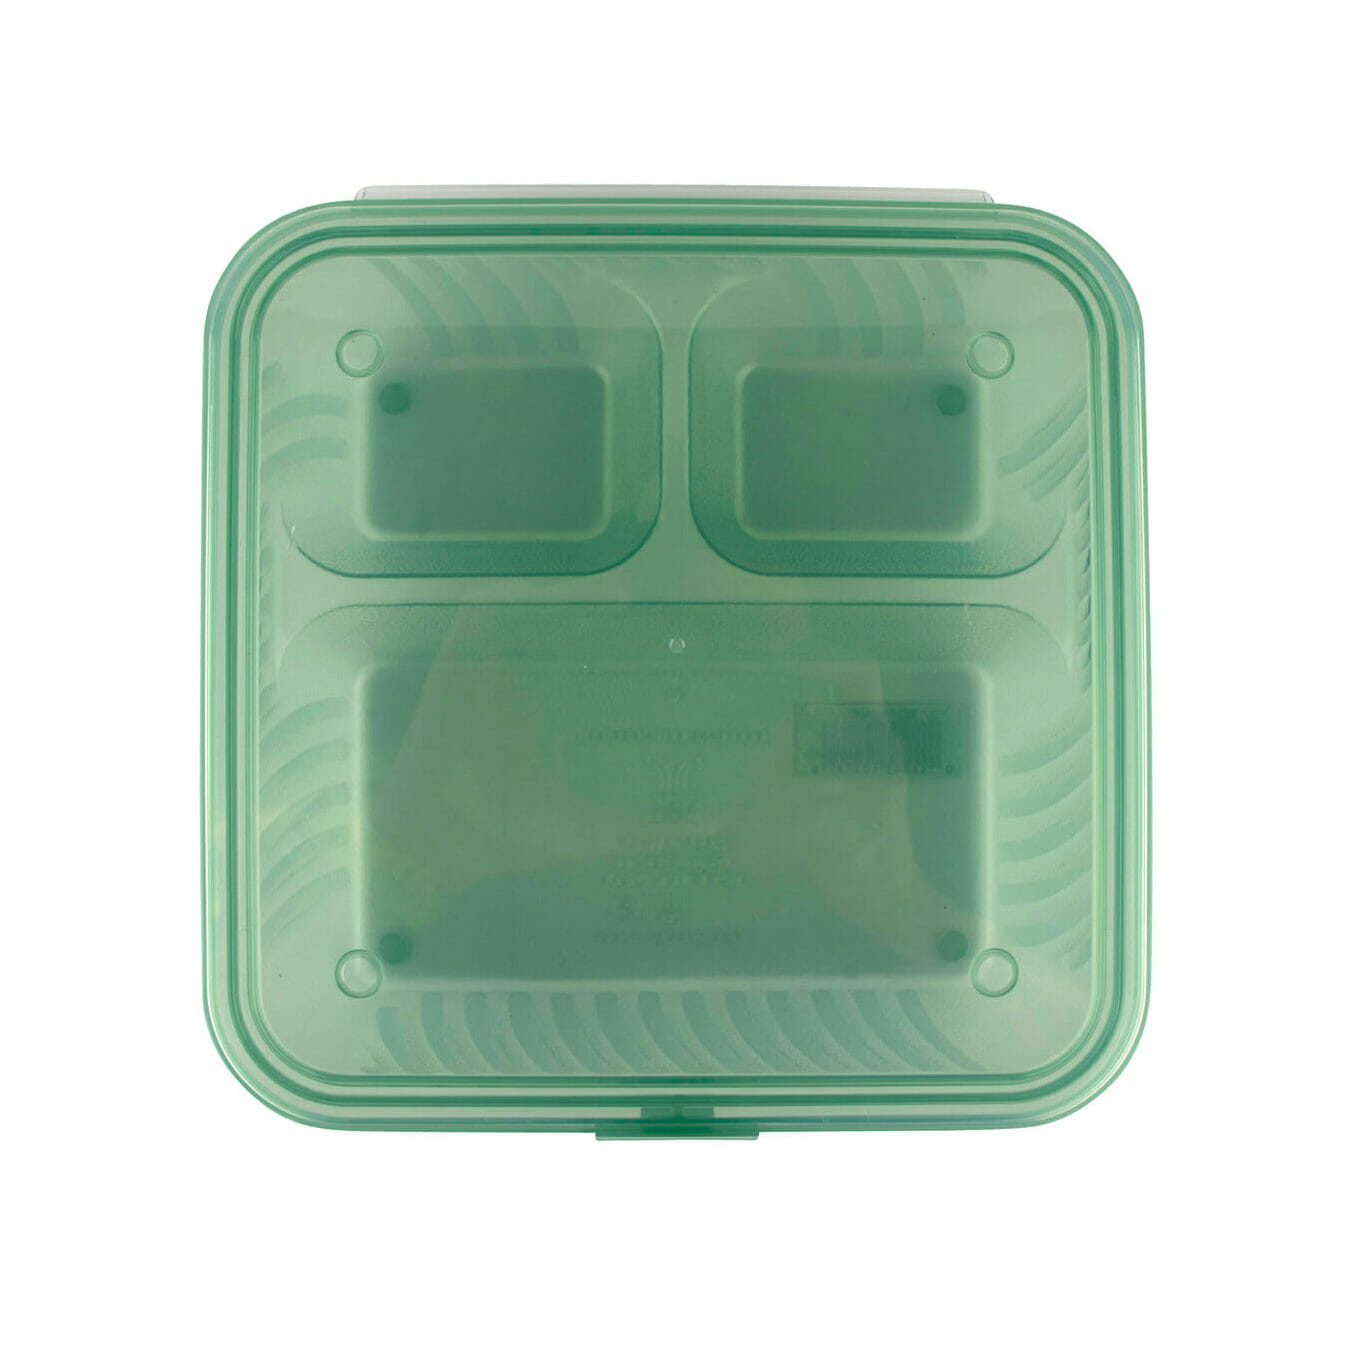 EC-16-JA - 3-Compartment Polypropylene, Jade, Flat Top Food Reusable  Container, 9 L x 9 W x 2 H, G.E.T. Eco-Takeout's - G.E.T